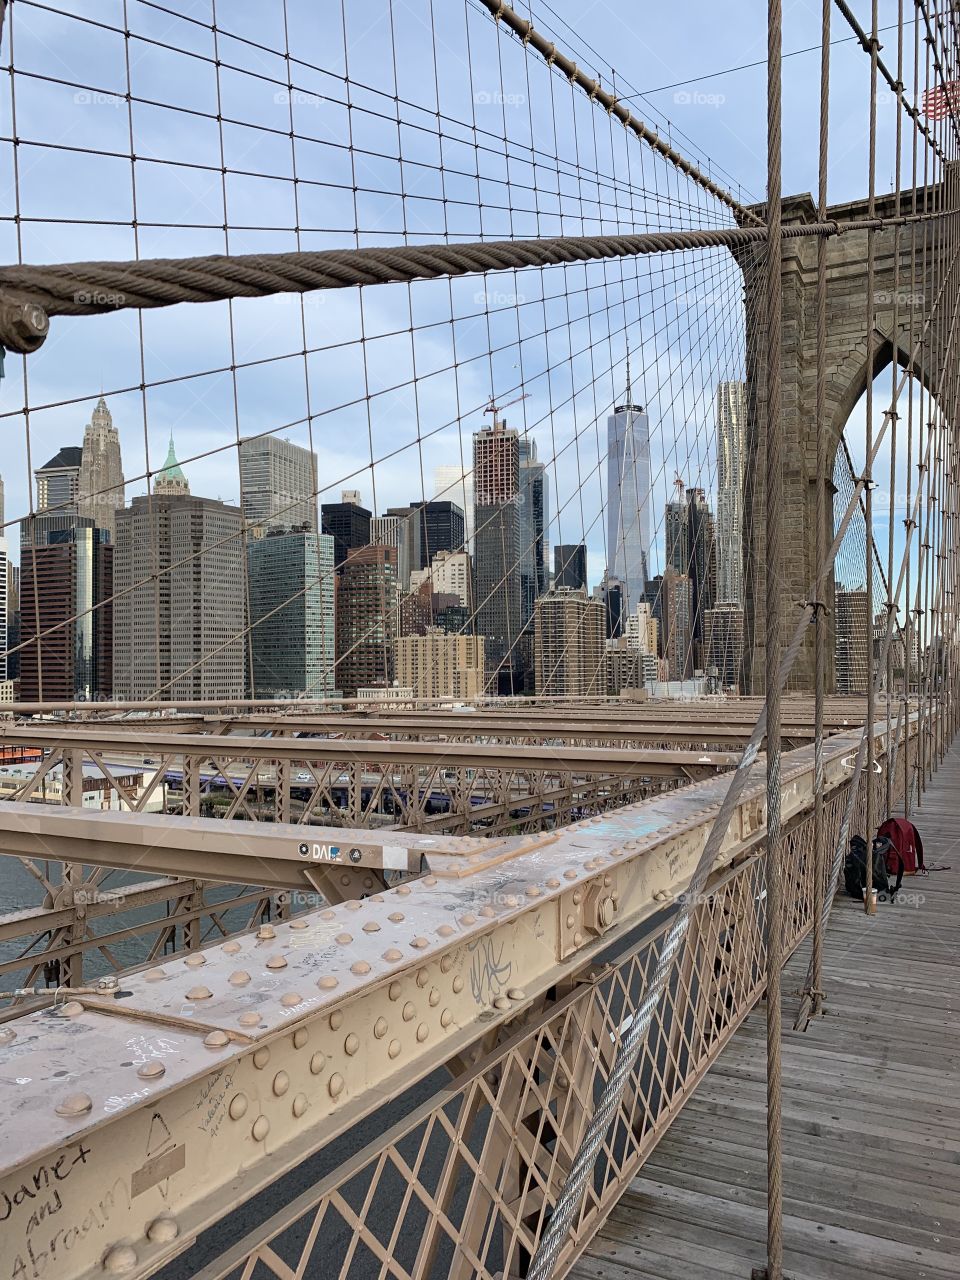 The cable wires on the Brooklyn Bridge with a slant view of Manhattan side of the arch